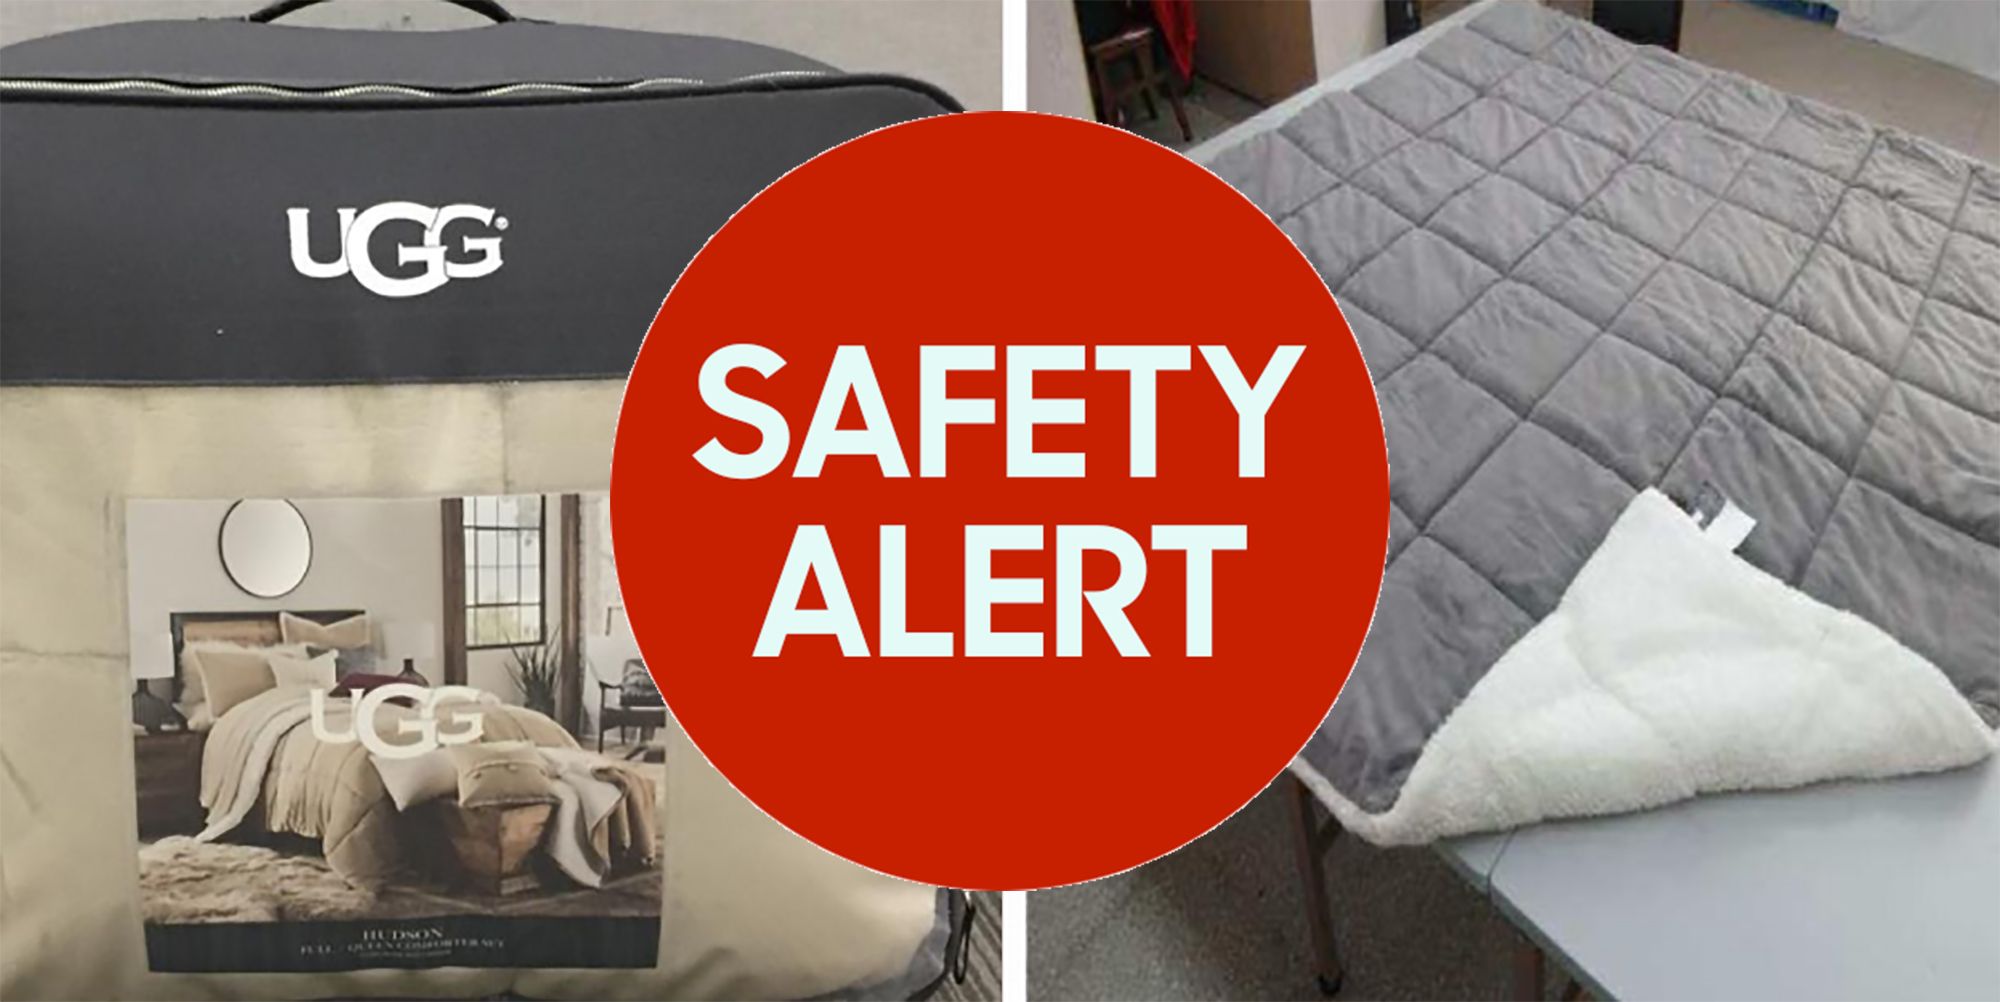 Ugg Comforters Recalled Due To Mold, Bed Bath And Beyond King Size Quilts